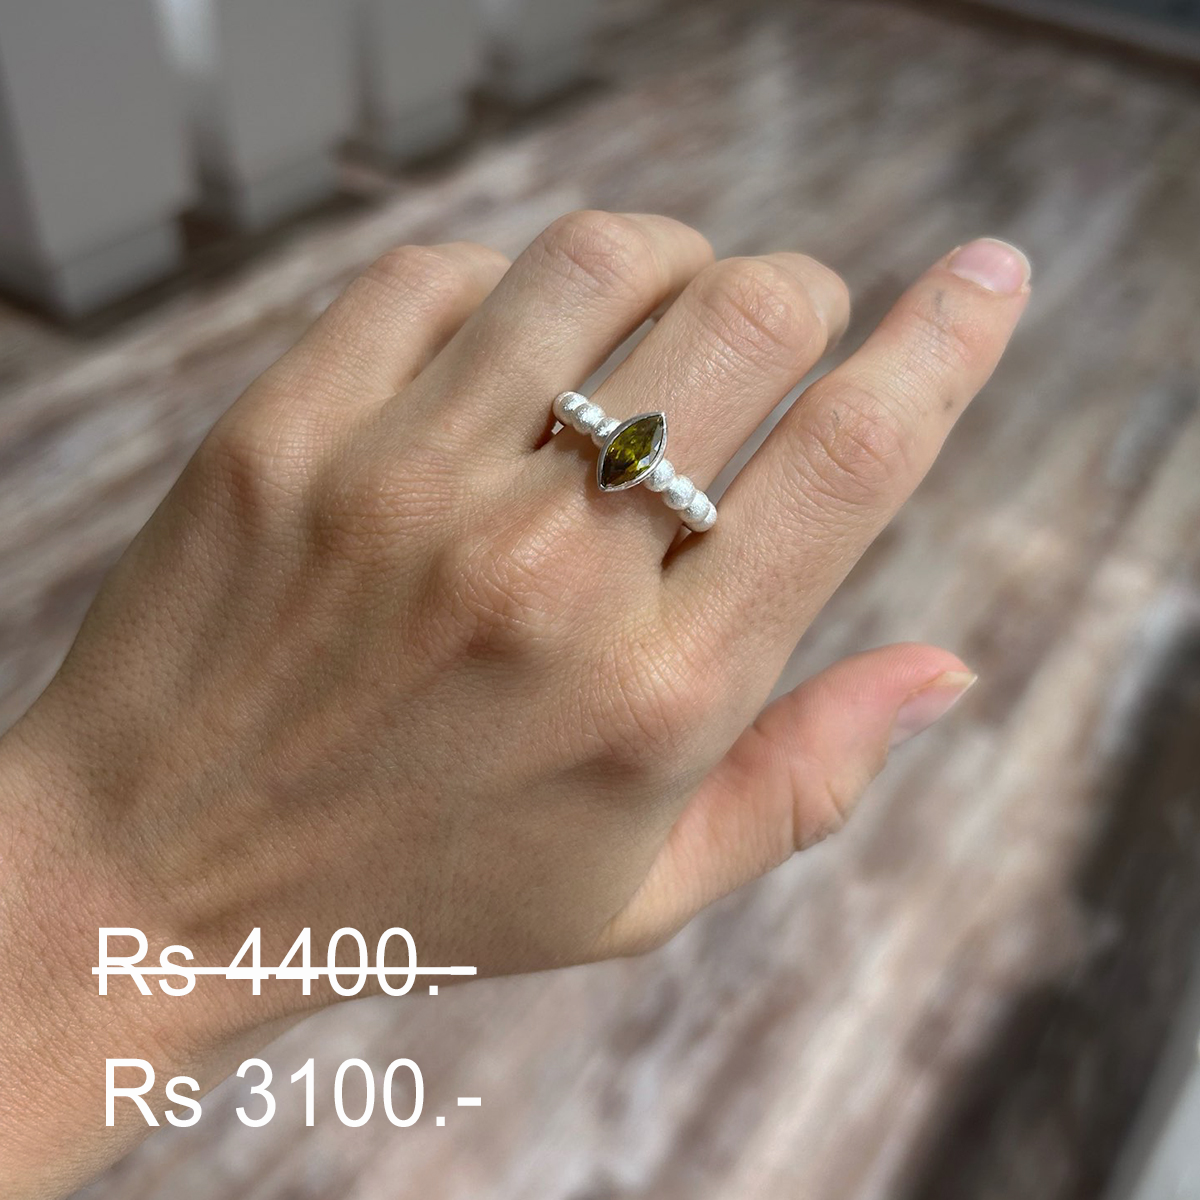 Discounted olive zirconia ring